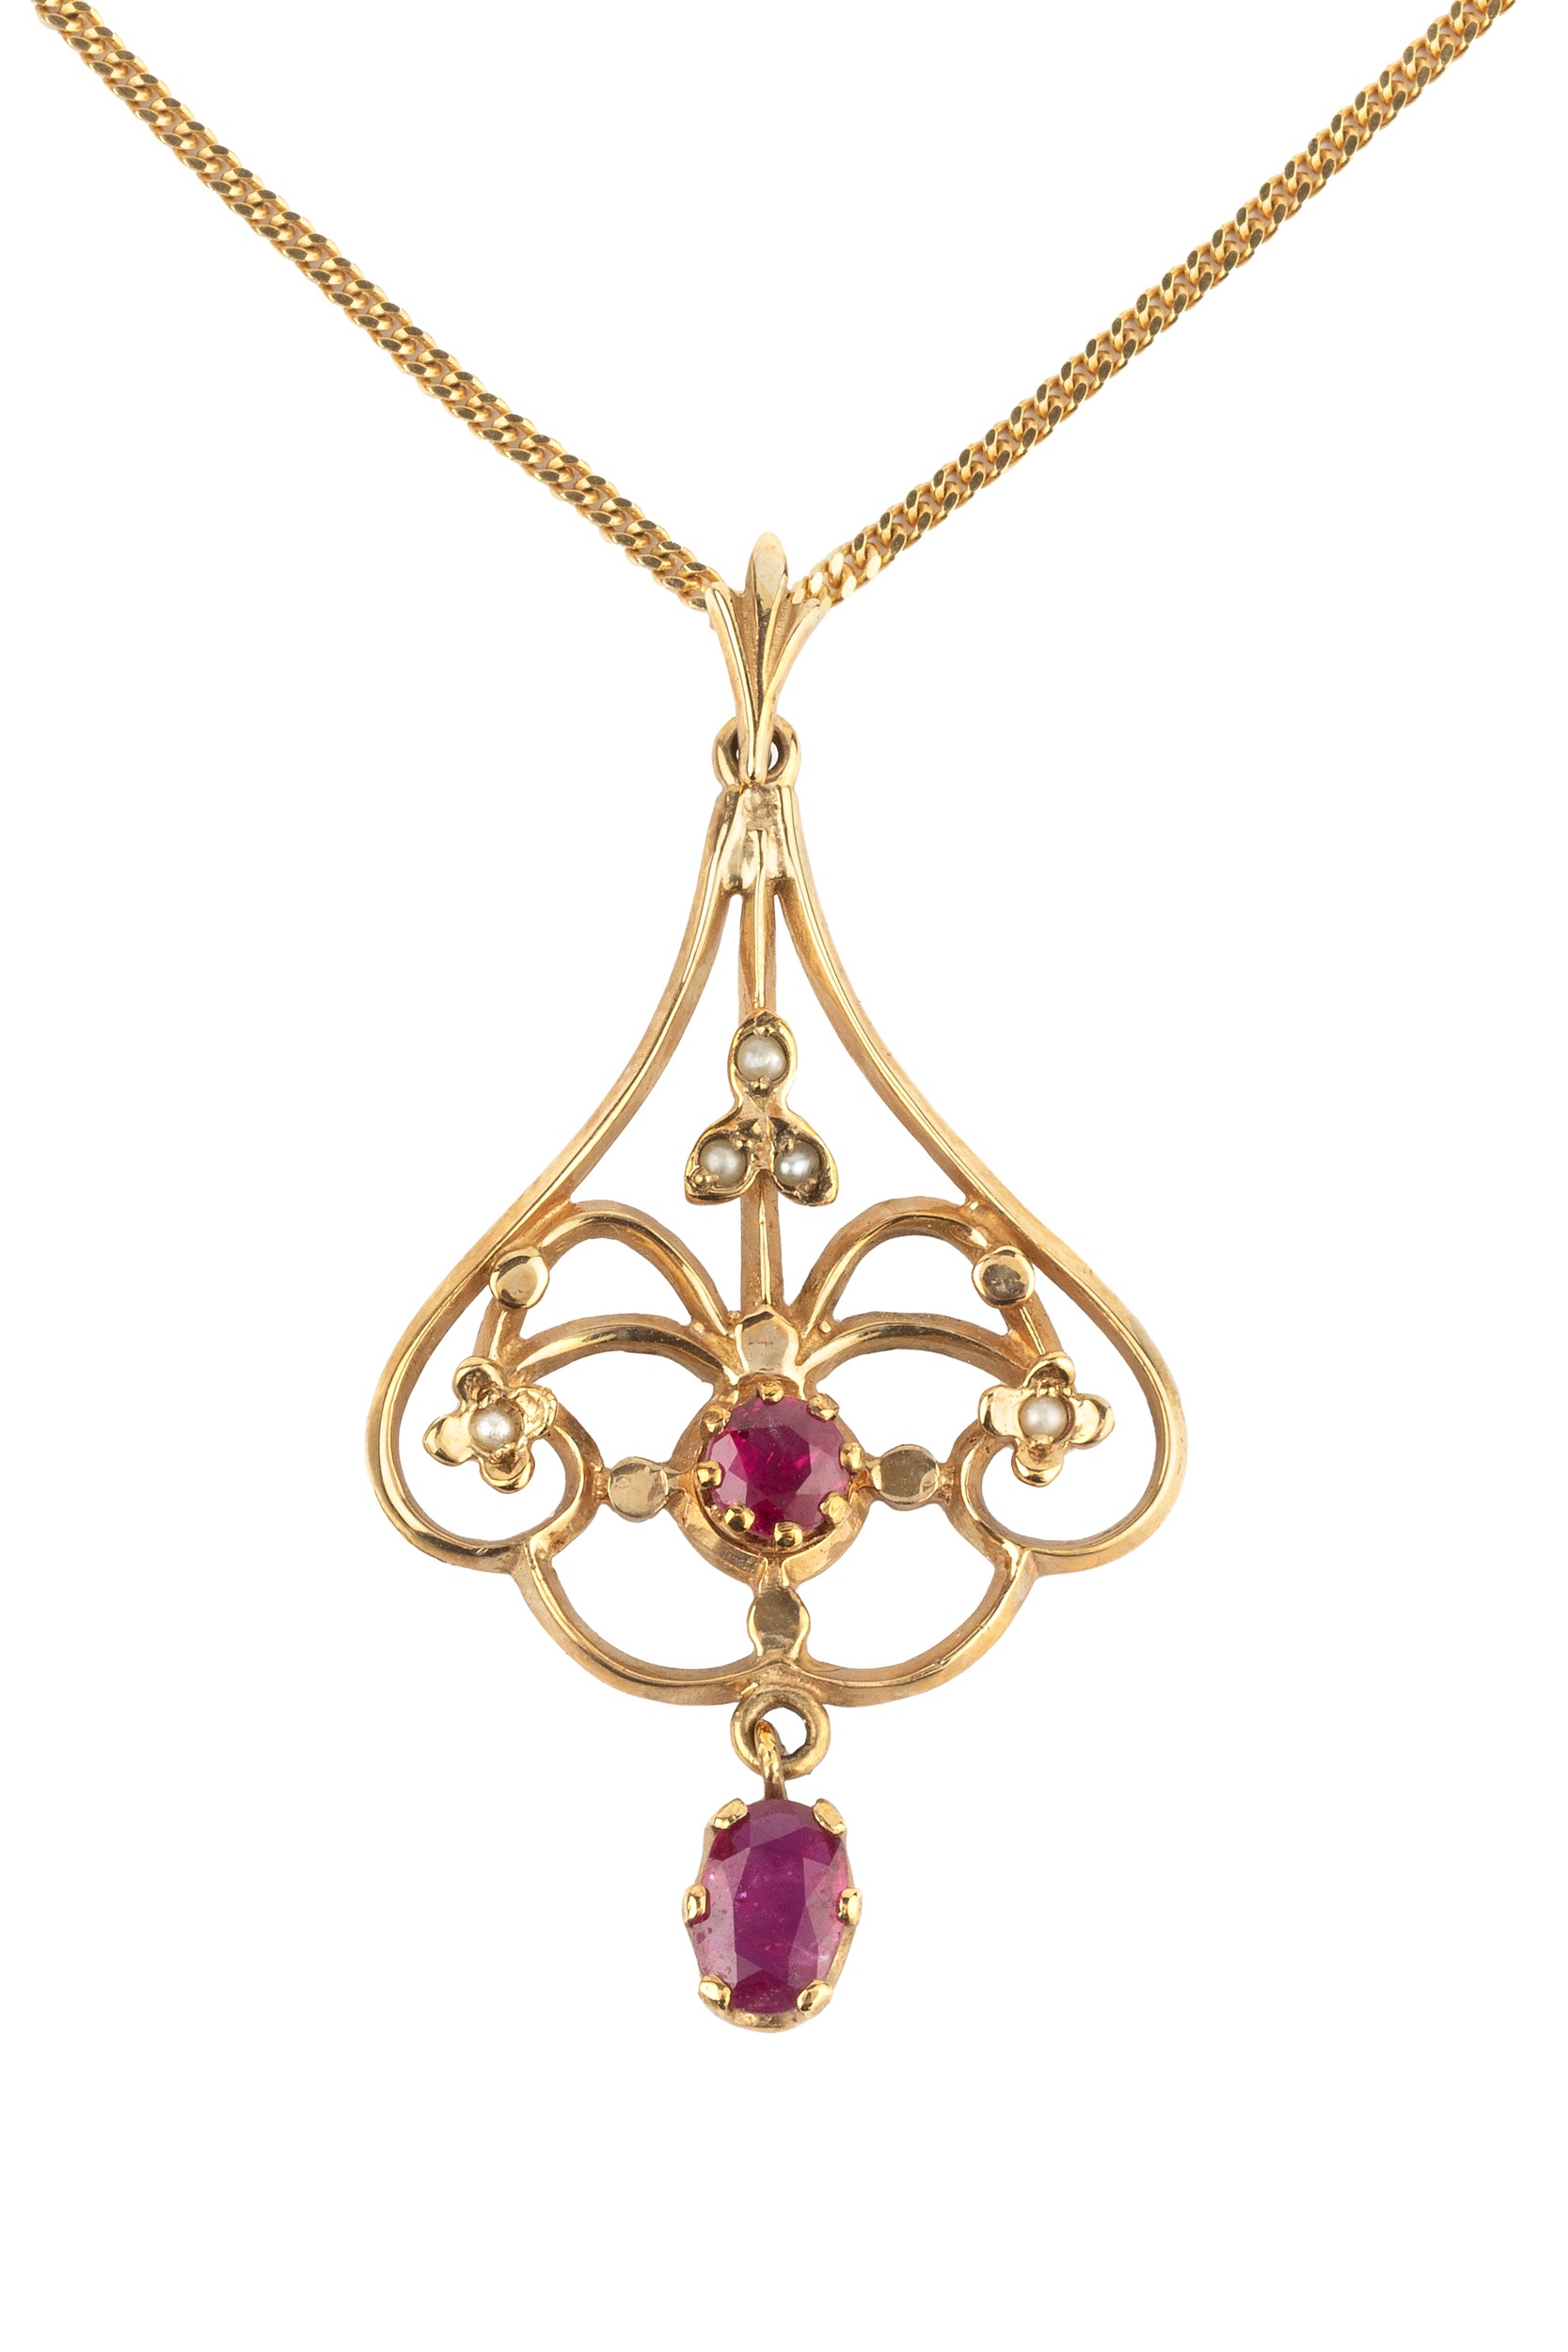 A 9ct gold, ruby and seed pearl pendant, of shaped openwork design, set with an oval cut ruby and